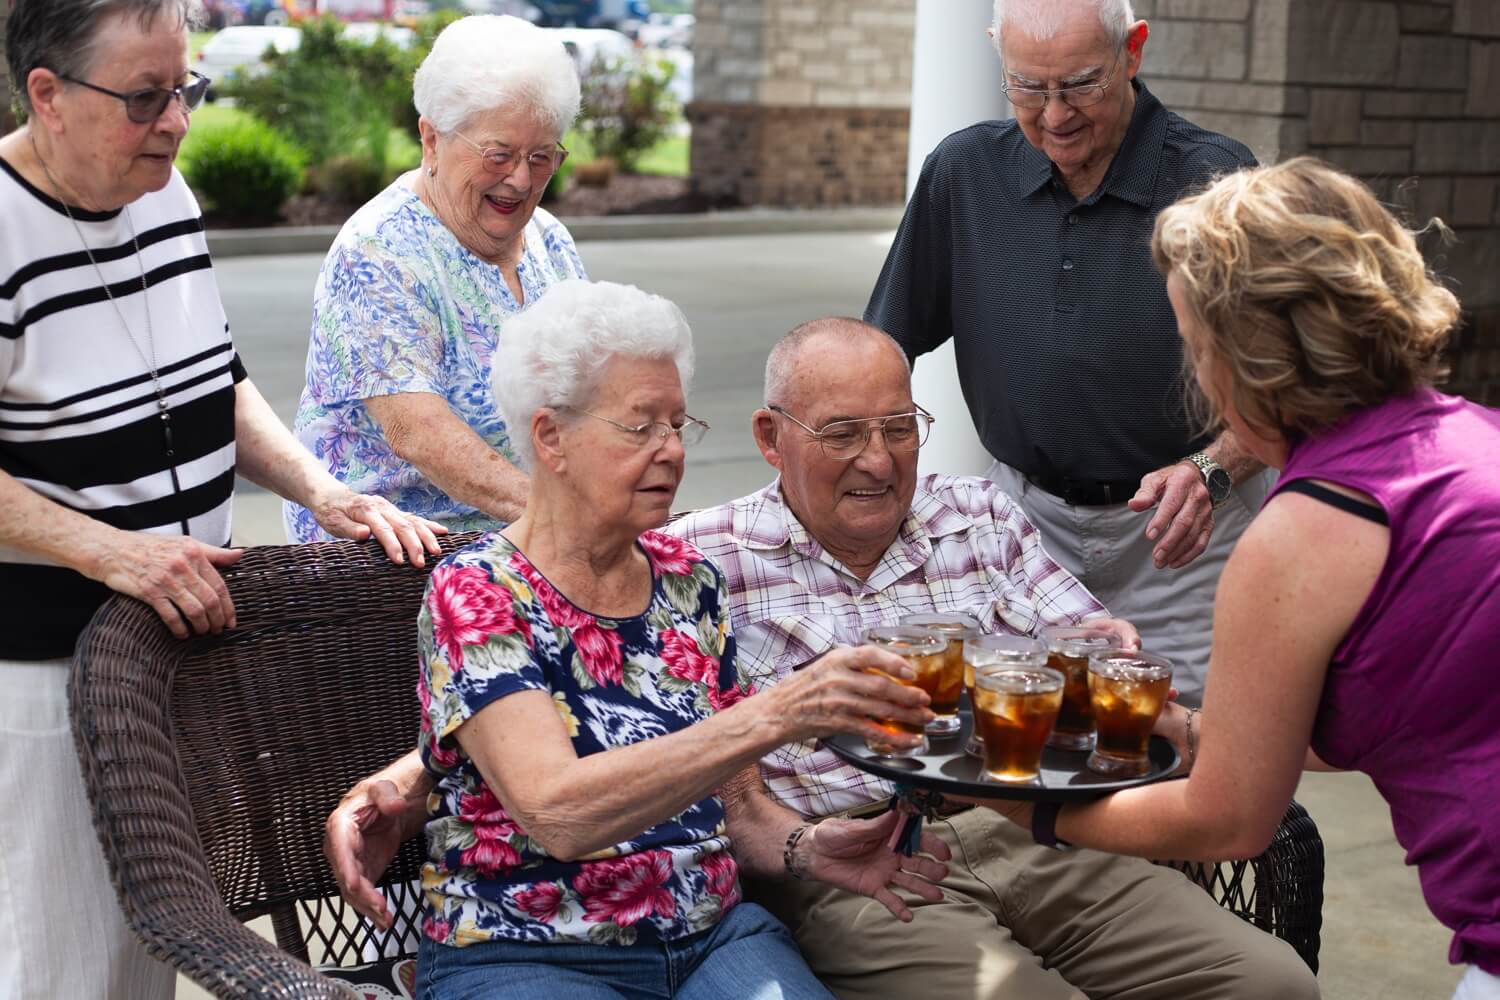 Residents_Sharing_Drinks_Together